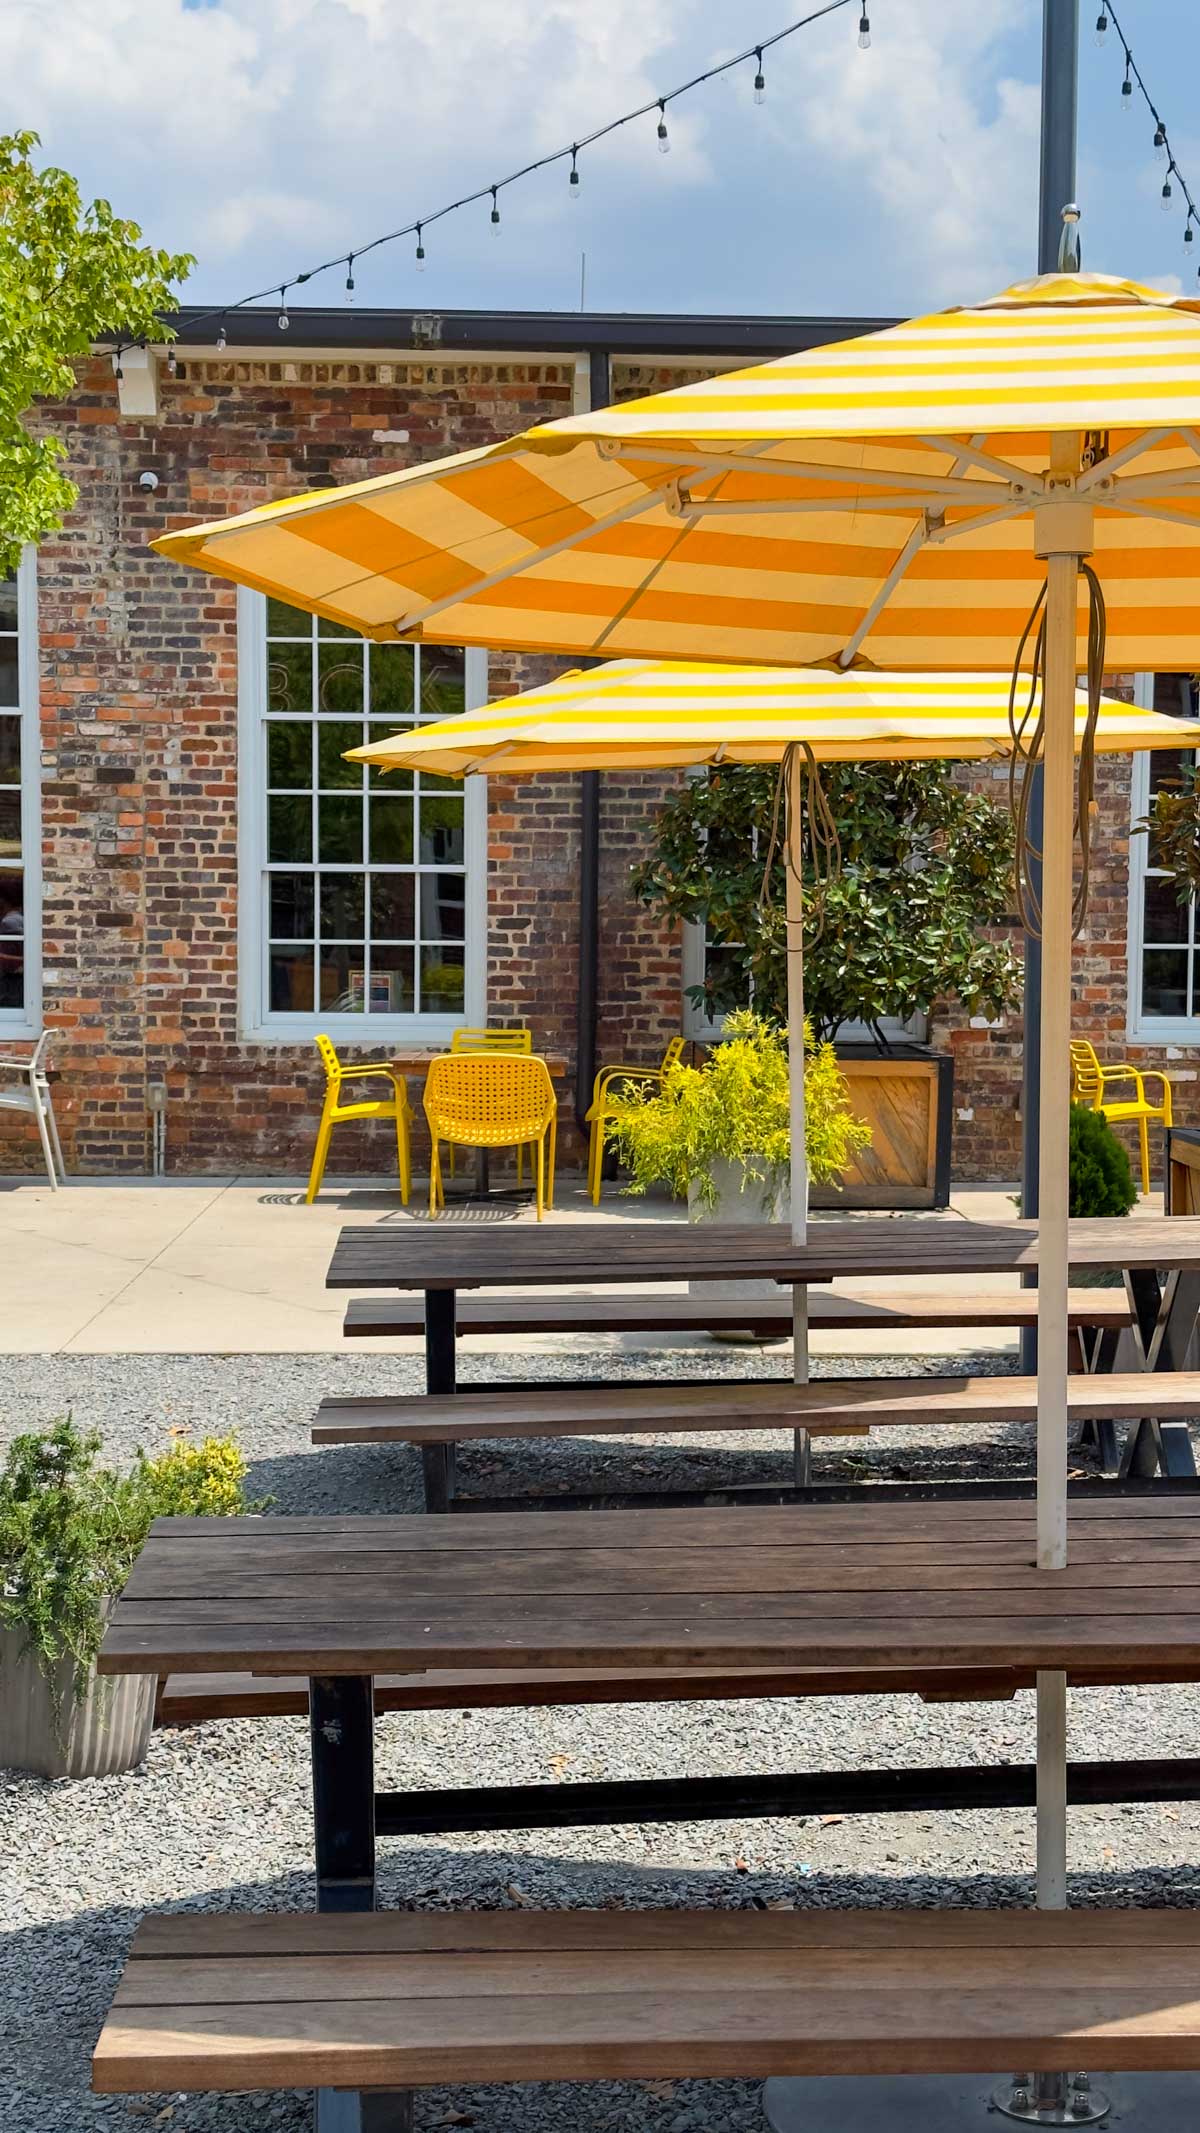 The yellow umbrellas and picnic tables in the outdoor courtyard of Optimist Hall in Charlotte, NC.